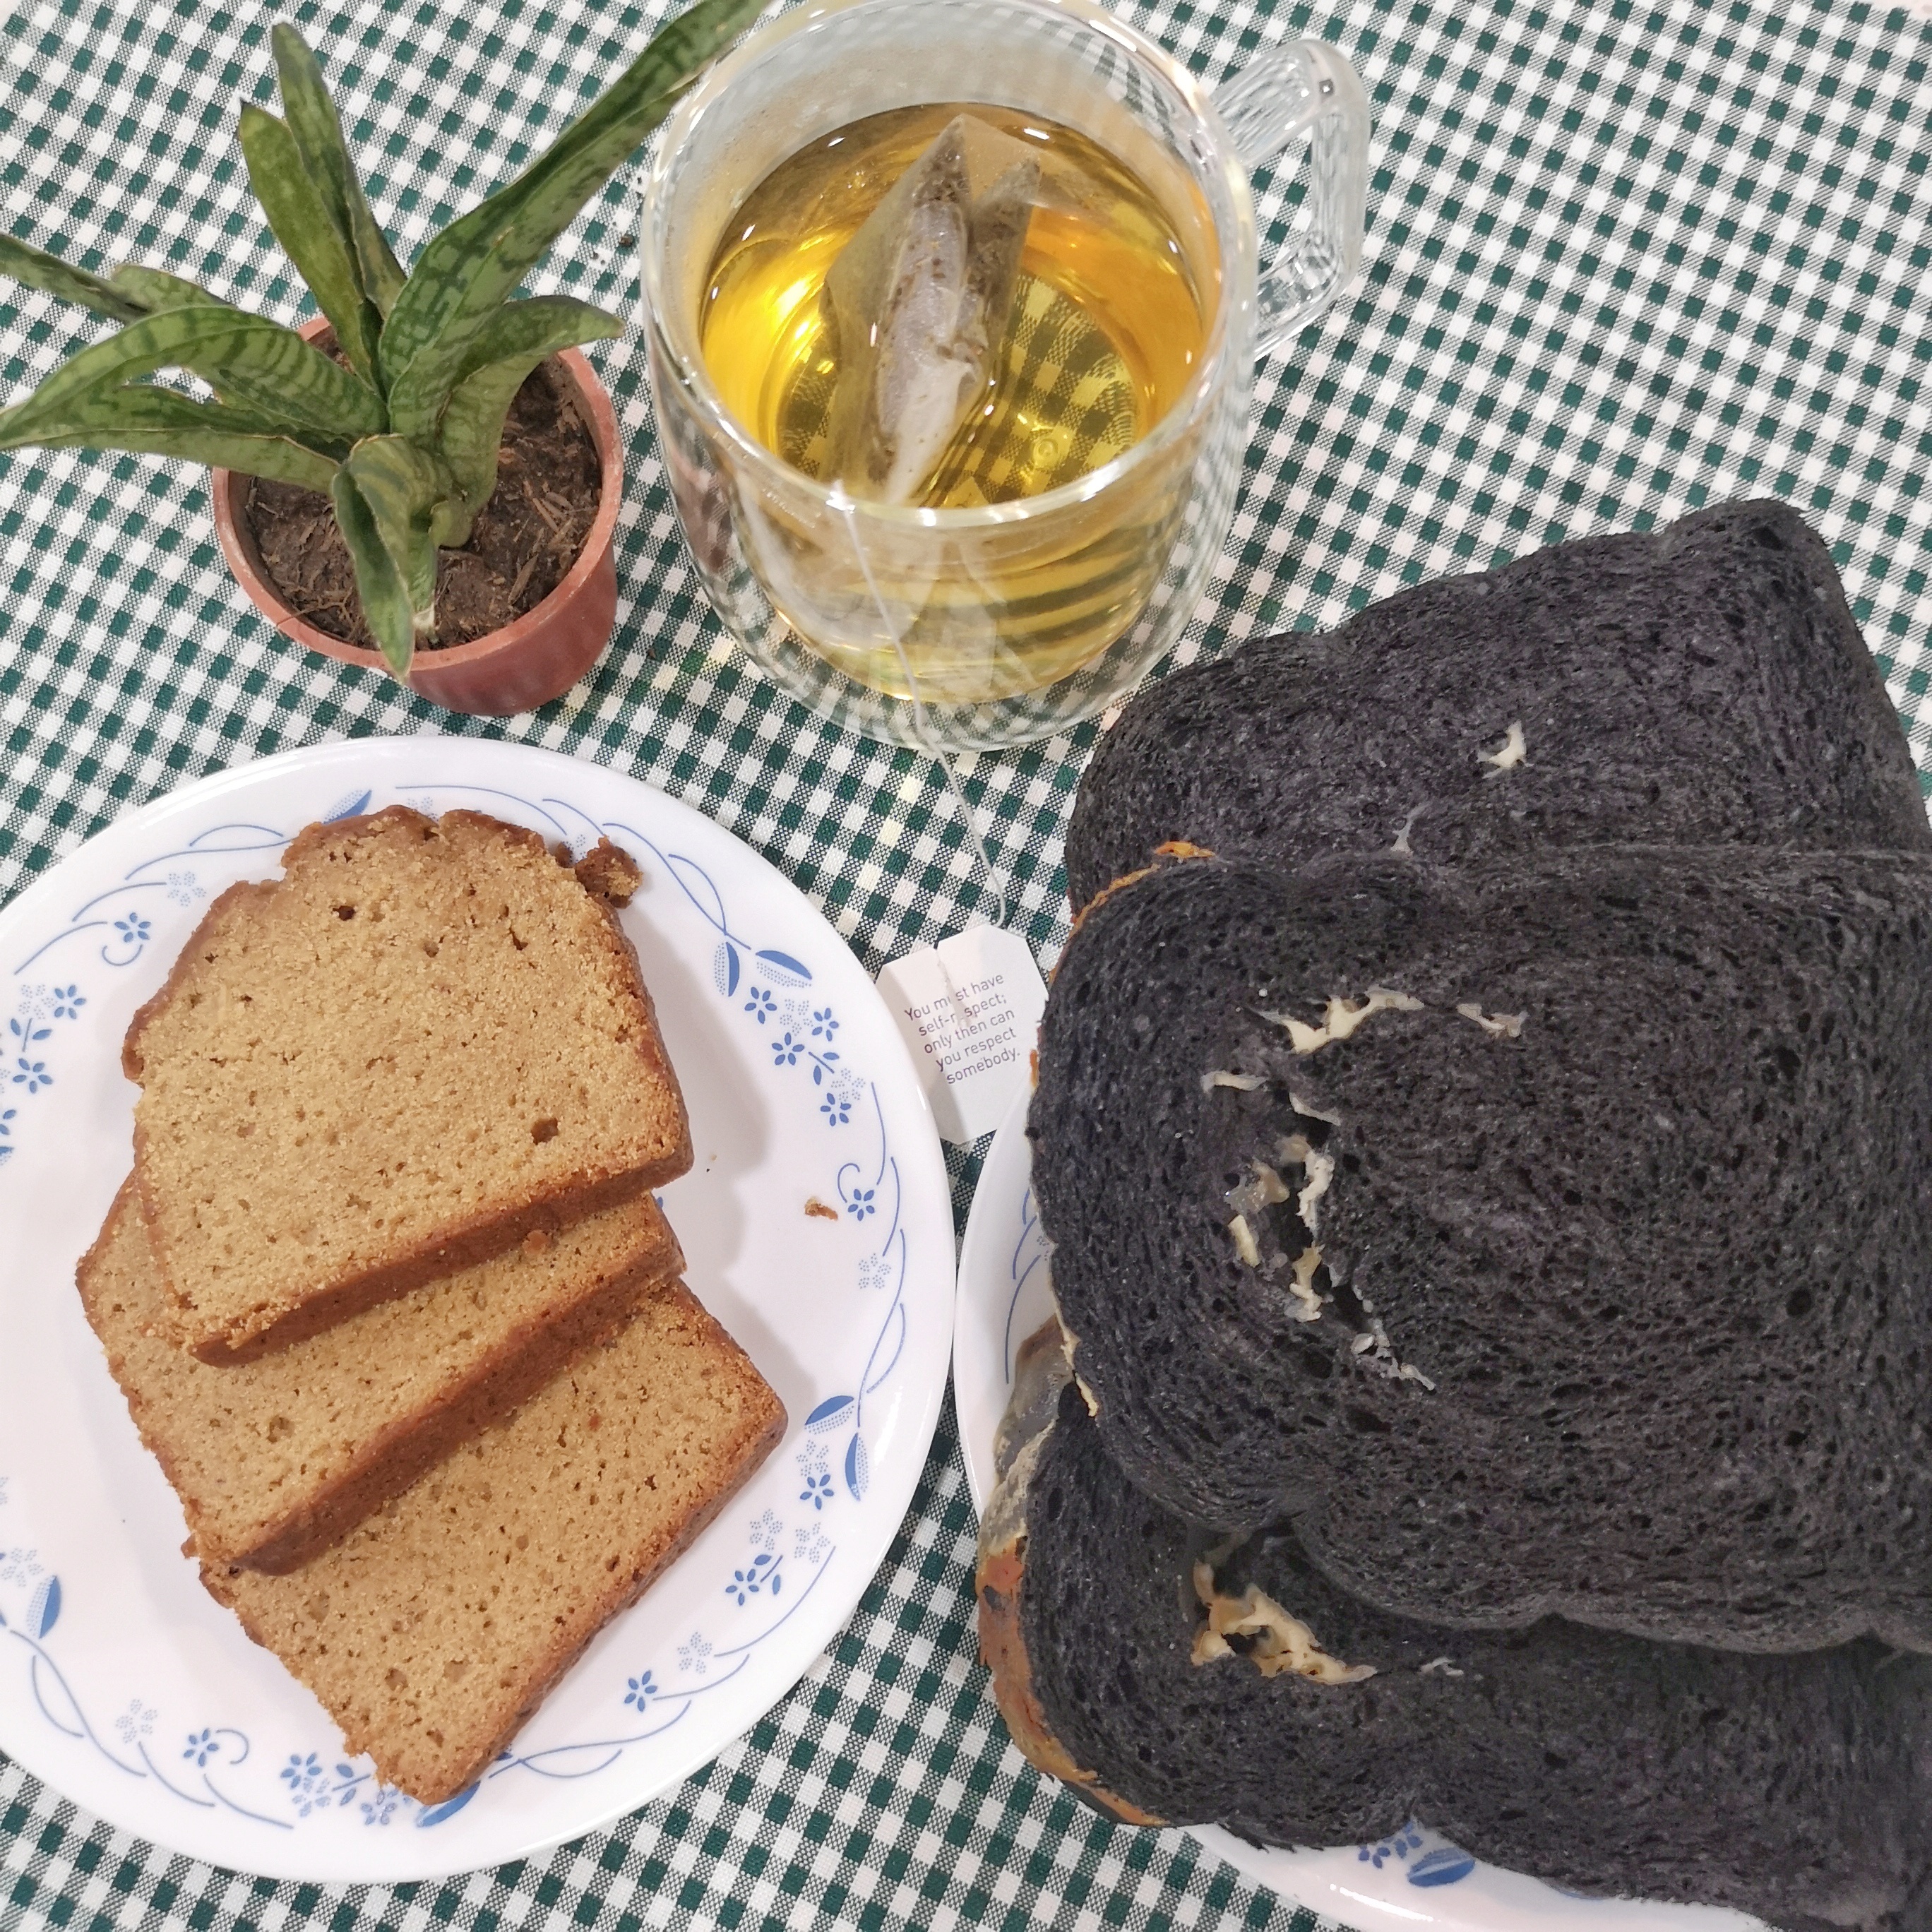 2 pieces of Cheesy Charcoal Almond Loaf (PhP 250), 2 pieces of Banana Saba Sourdough Loaf (PhP 200) and Green Tea with Kombucha